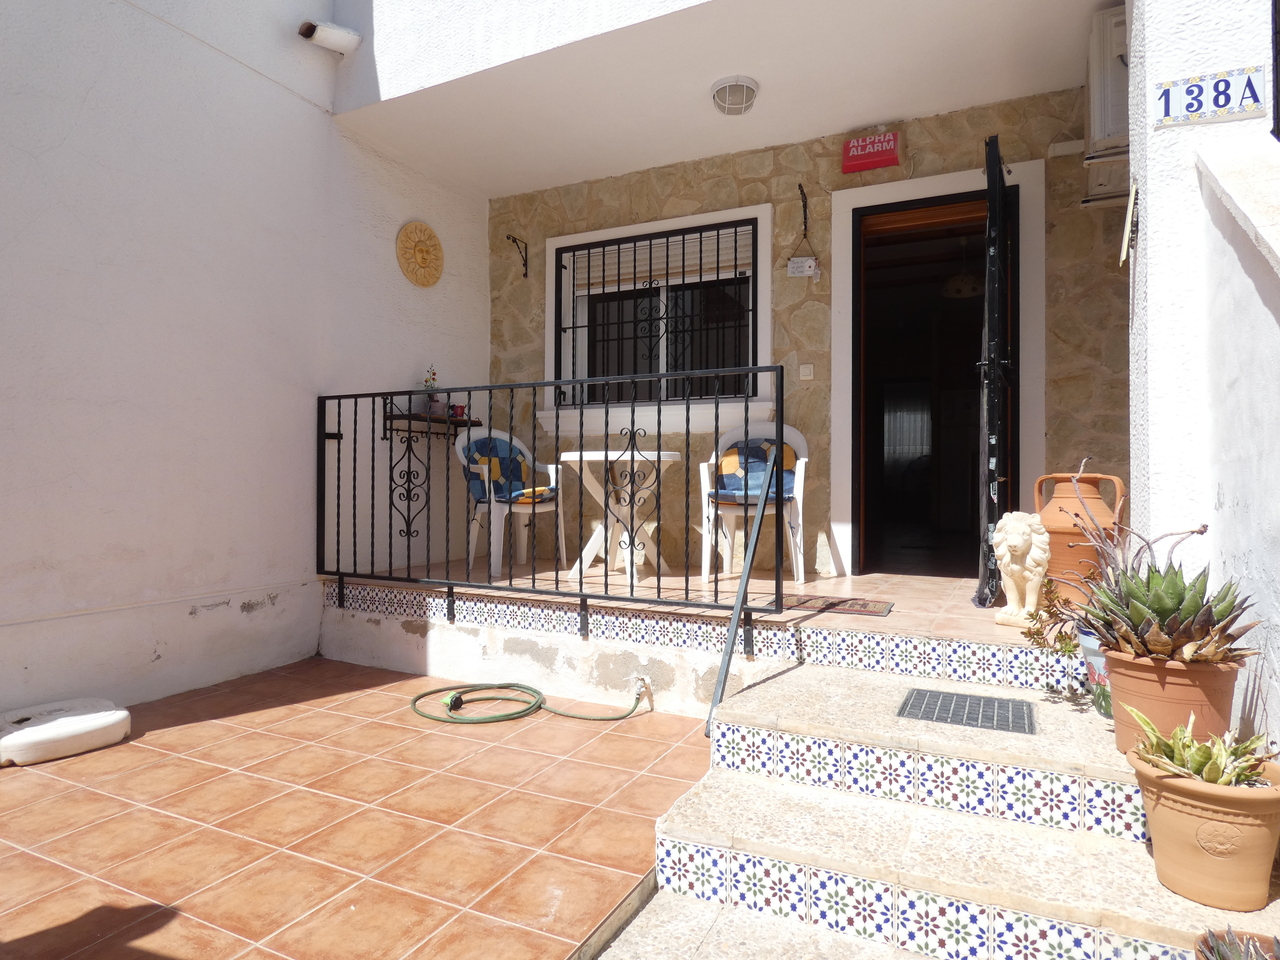 For Sale: 
Apartments in Algorfa Beds: 2 Baths: 1 Price: 69,995€